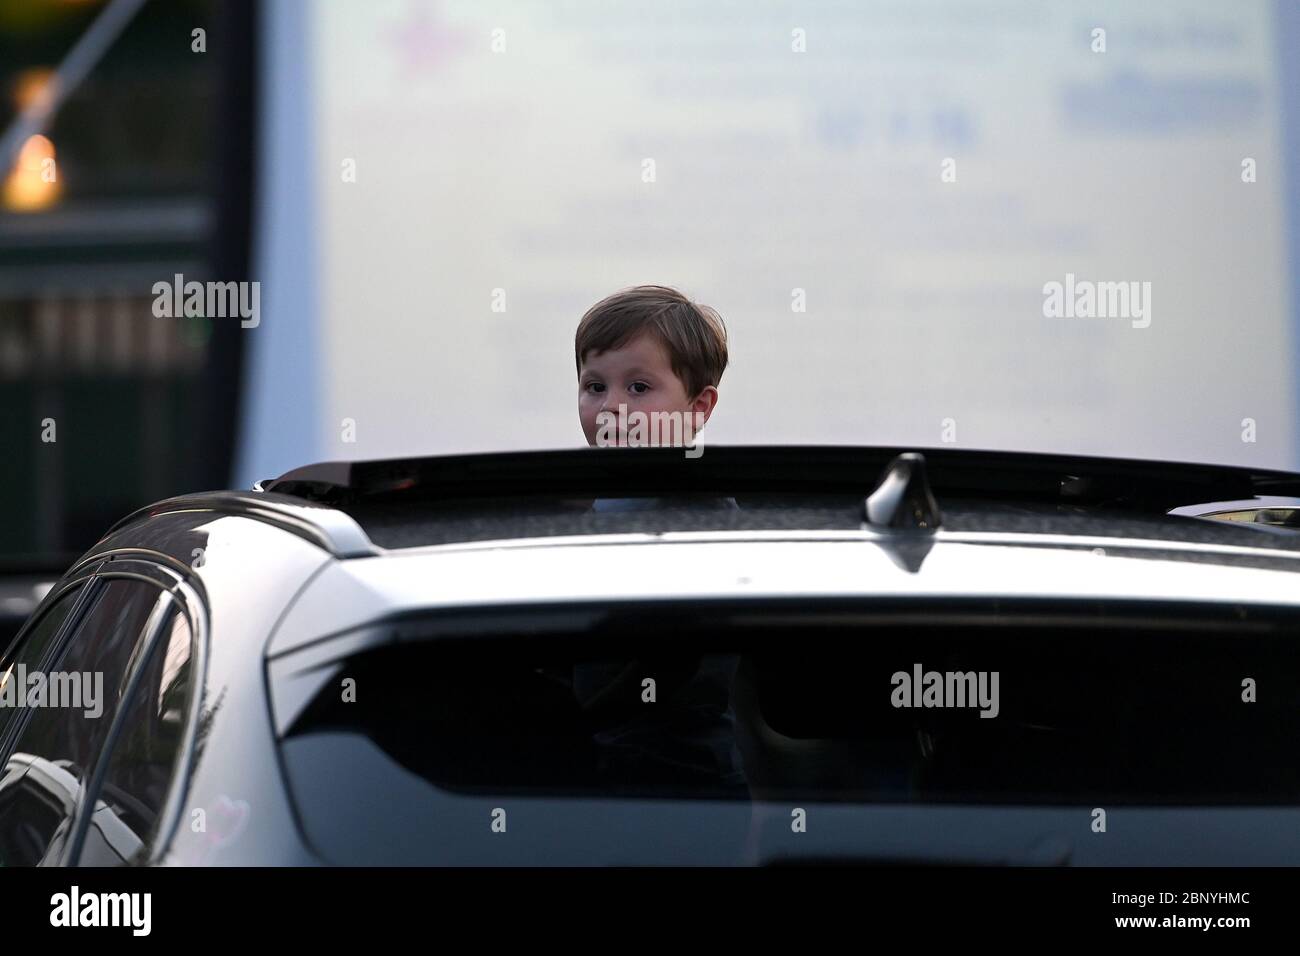 New York City, USA. 16th May, 2020. A young boy pops his head out of a vehicle's sunroof at Bel Aire Diner ‘drive-in theatre before the start of the movie, in the Astoria neighborhood of Queens, New York, NY, May 16, 2020. With restaurants limited to take-out under Coronavirus city rules, Bel Aire Diner allows motorist who reserved spots in their parking lot to order from the diner as they watch a movie. (Anthony Behar/Sipa USA) Credit: Sipa USA/Alamy Live News Stock Photo